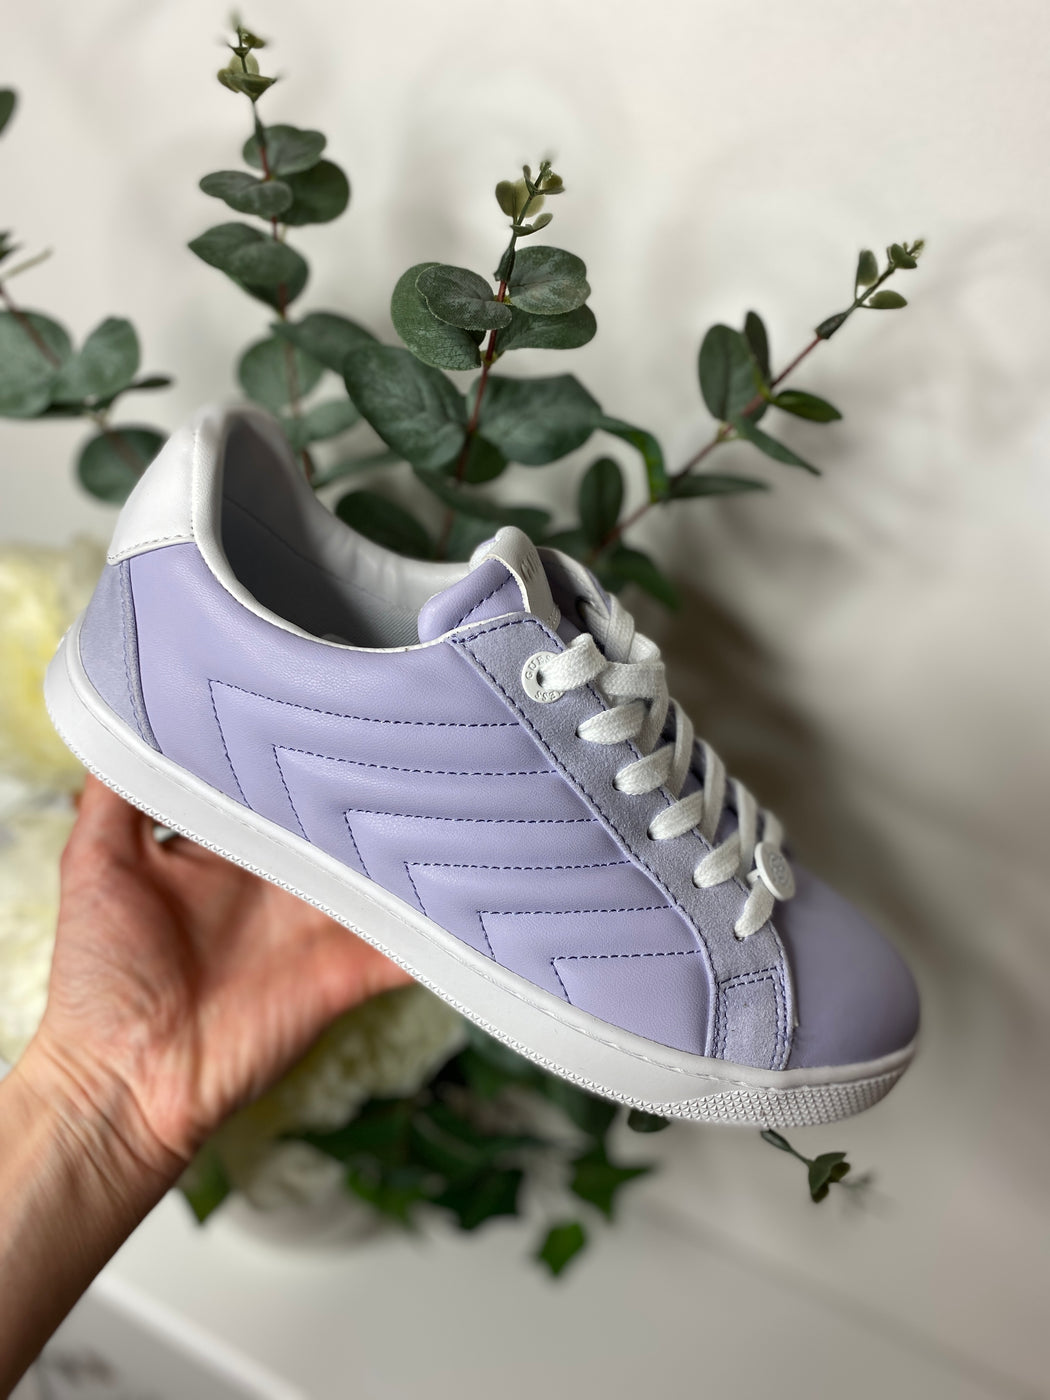 Lilac reenmana quilted guess sneaker